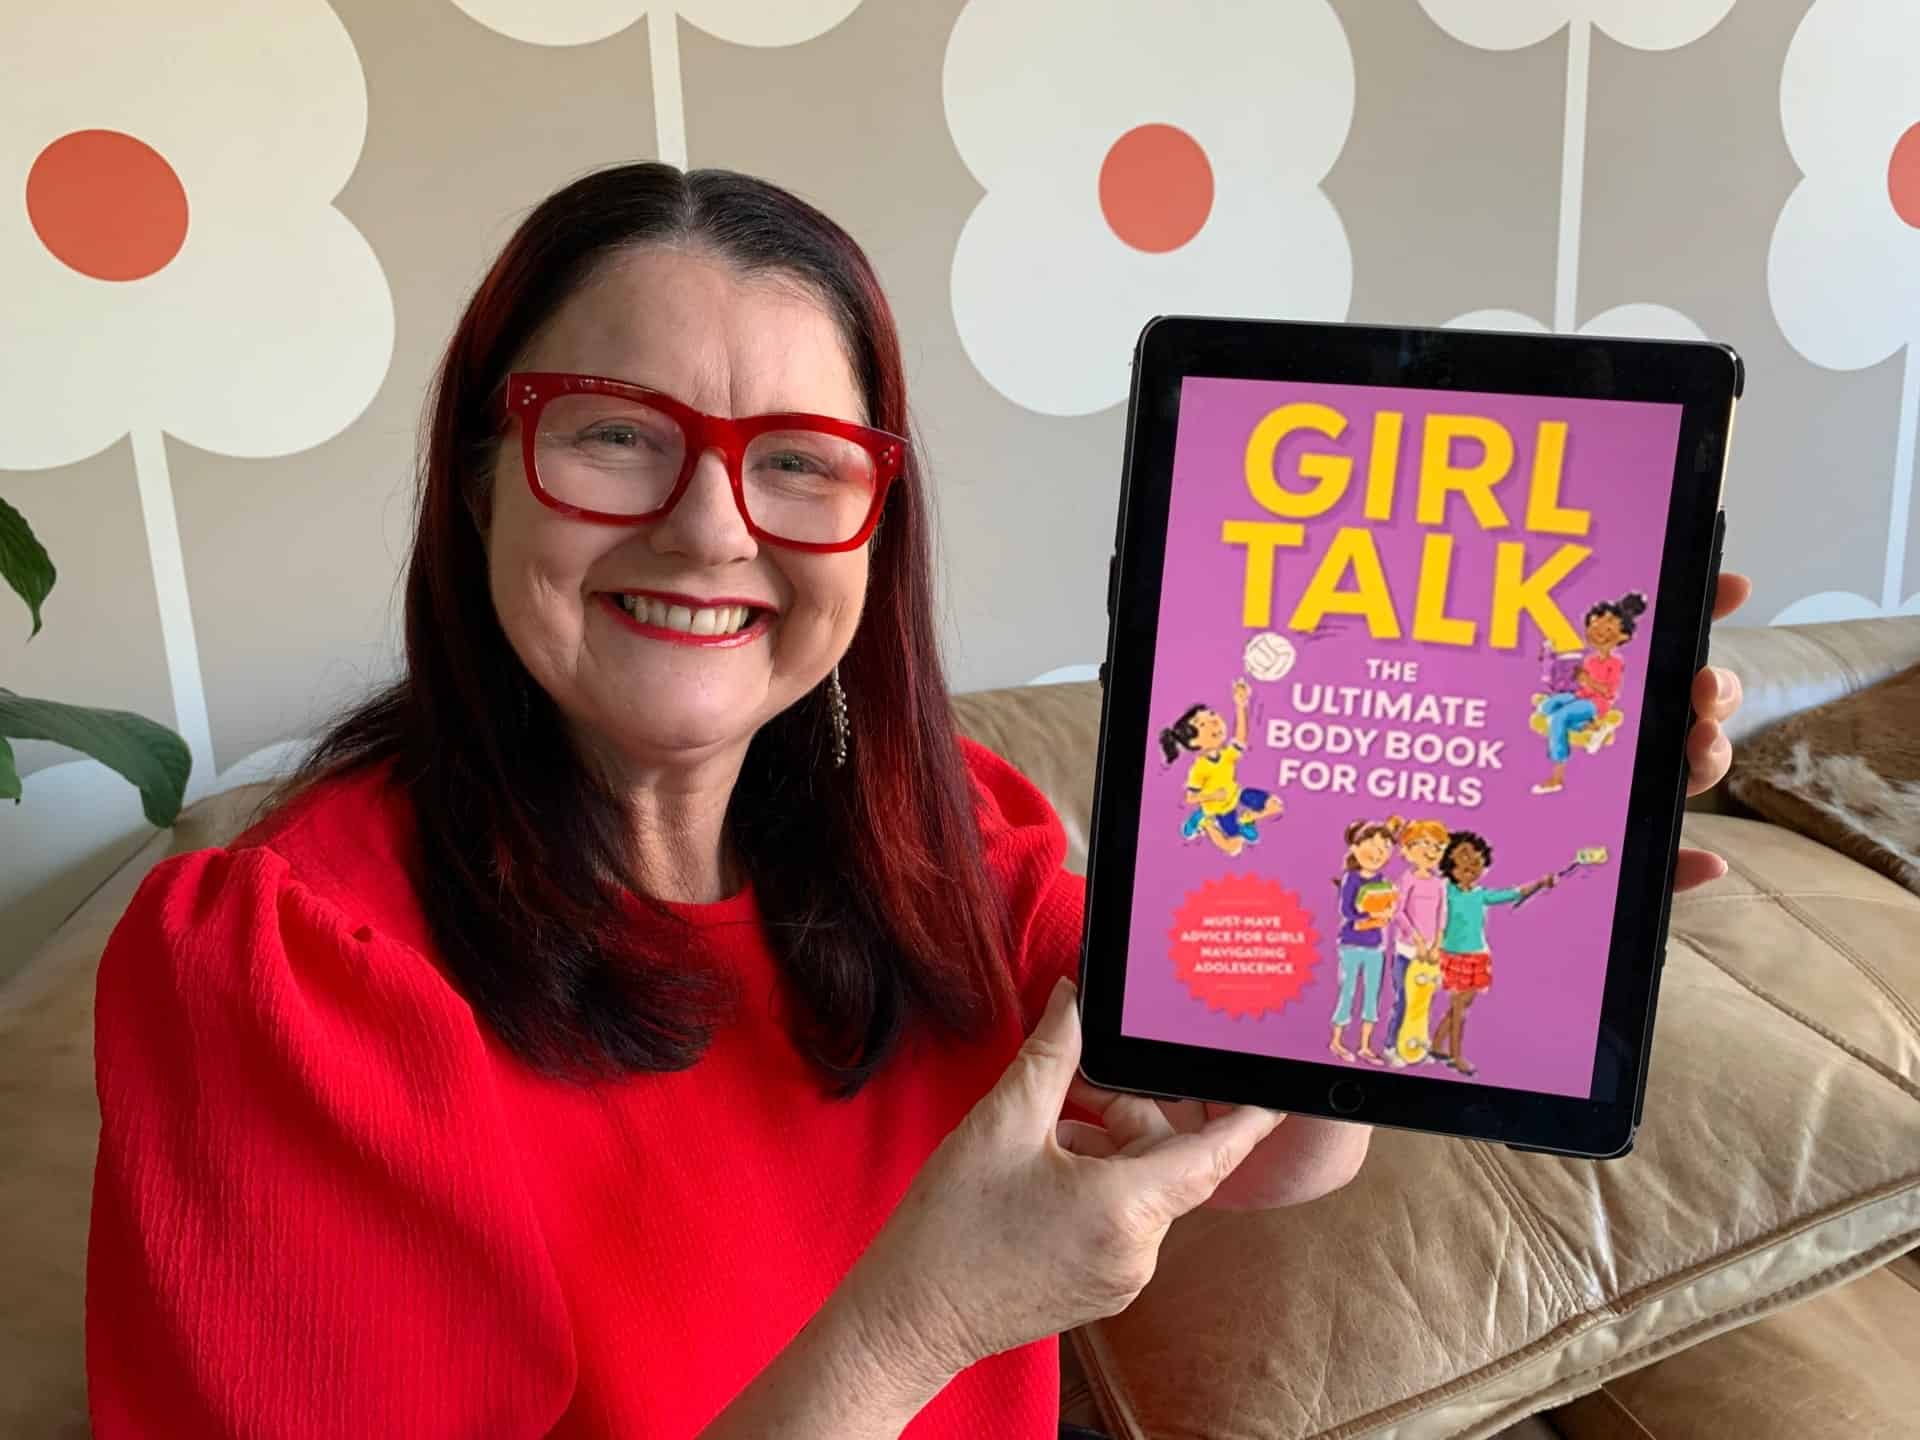 Girl Talk: The Ultimate Body & Puberty Book for Girls! - Book review by Rowena Thomas | 'Amazing Me'